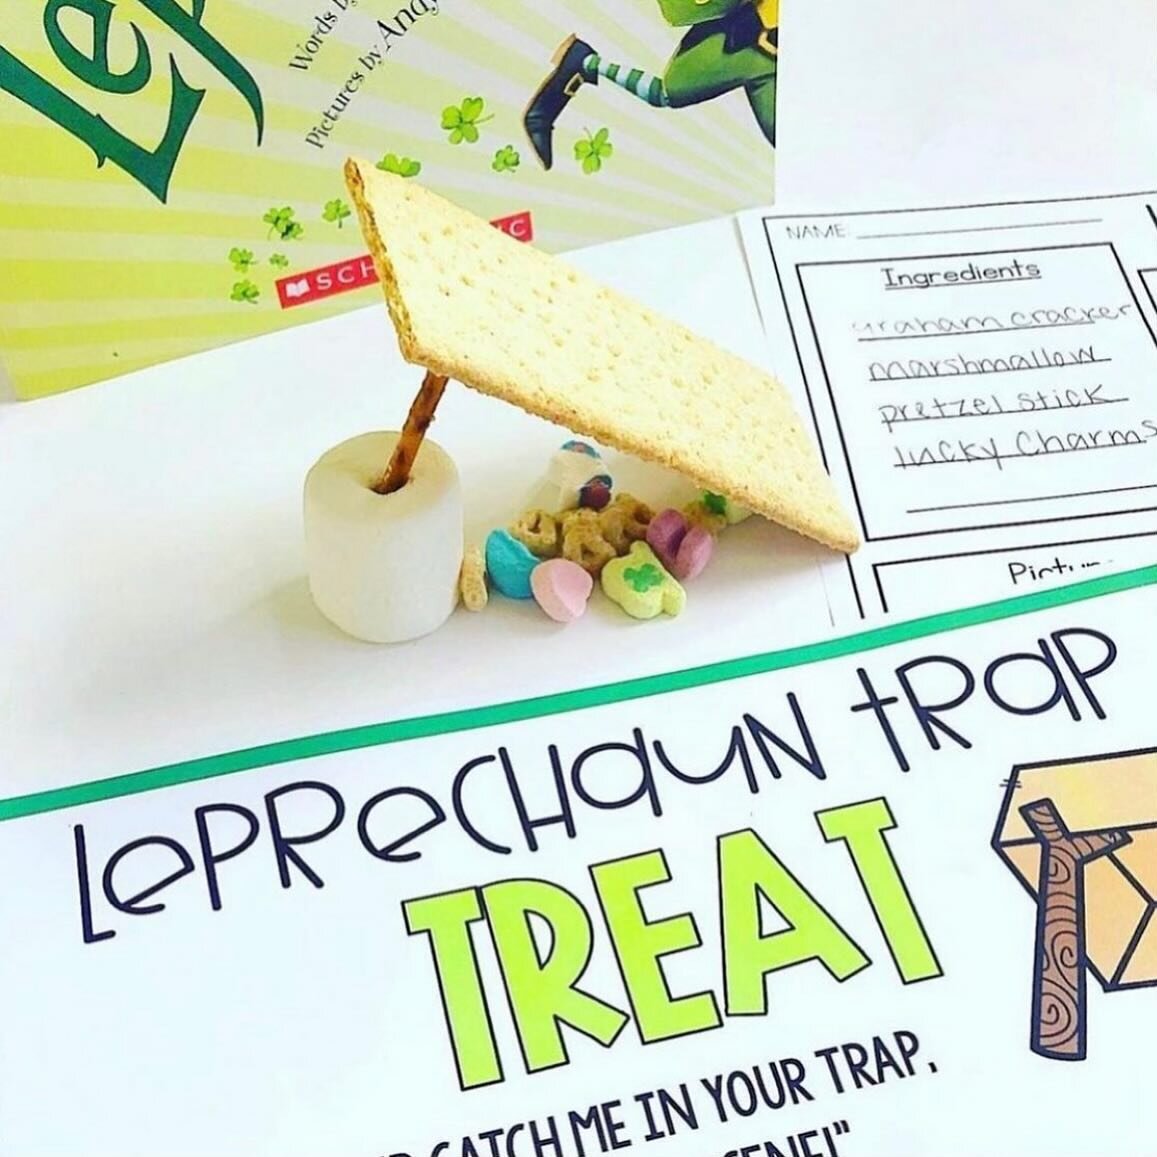 MARCH is here!☘️
March is one of my favorite months of the year! 
This leprechaun trap is one of my favorite activities to use this March with the book, How to Catch a Leprechaun! Students will use a large marshmallow, graham cracker, pretzel stick, 